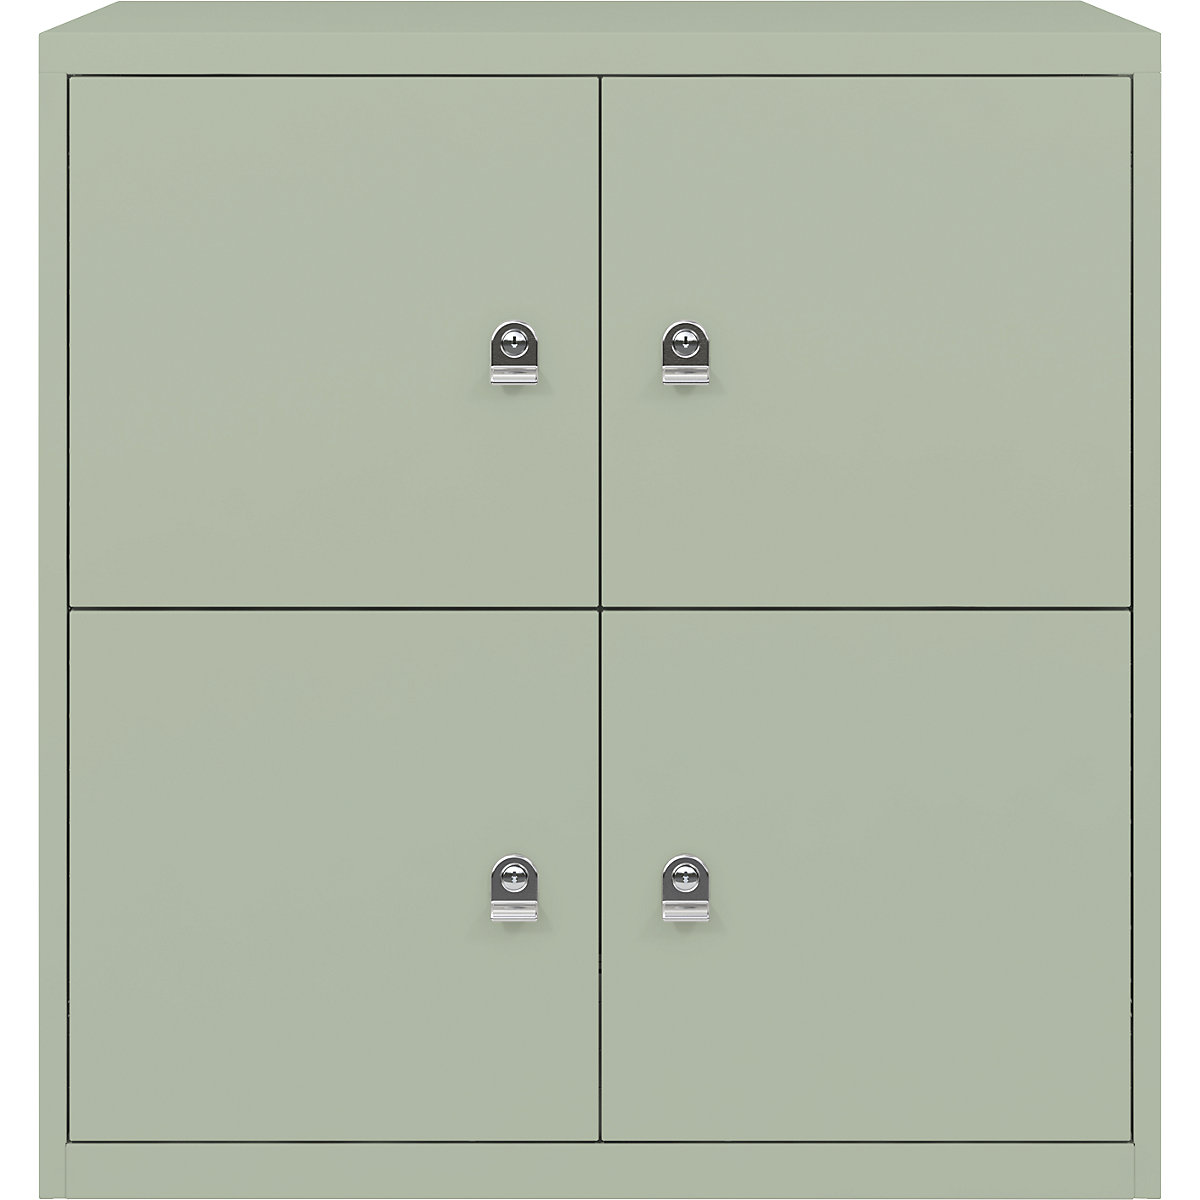 LateralFile™ lodge – BISLEY, with 4 lockable compartments, height 375 mm each, regent